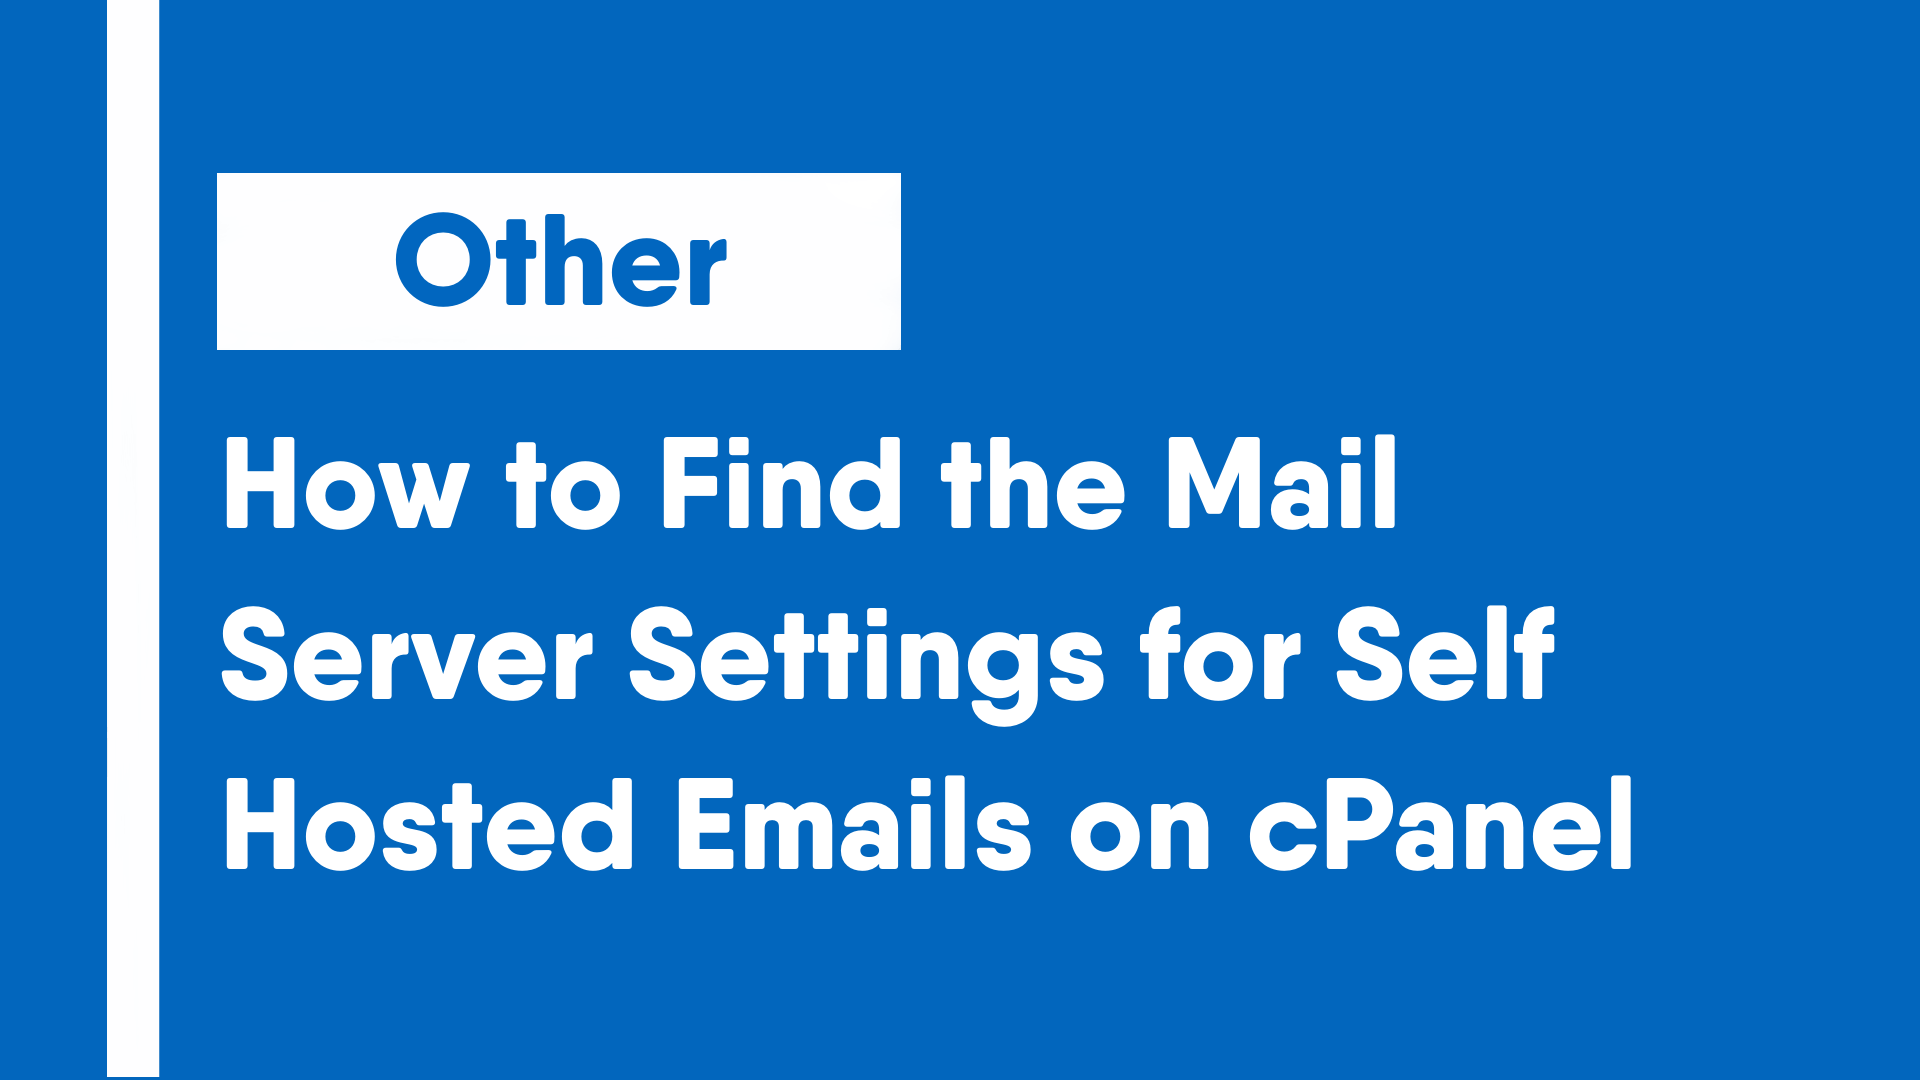 How to Find the Mail Server Settings for SelfHosted Emails on cPanel